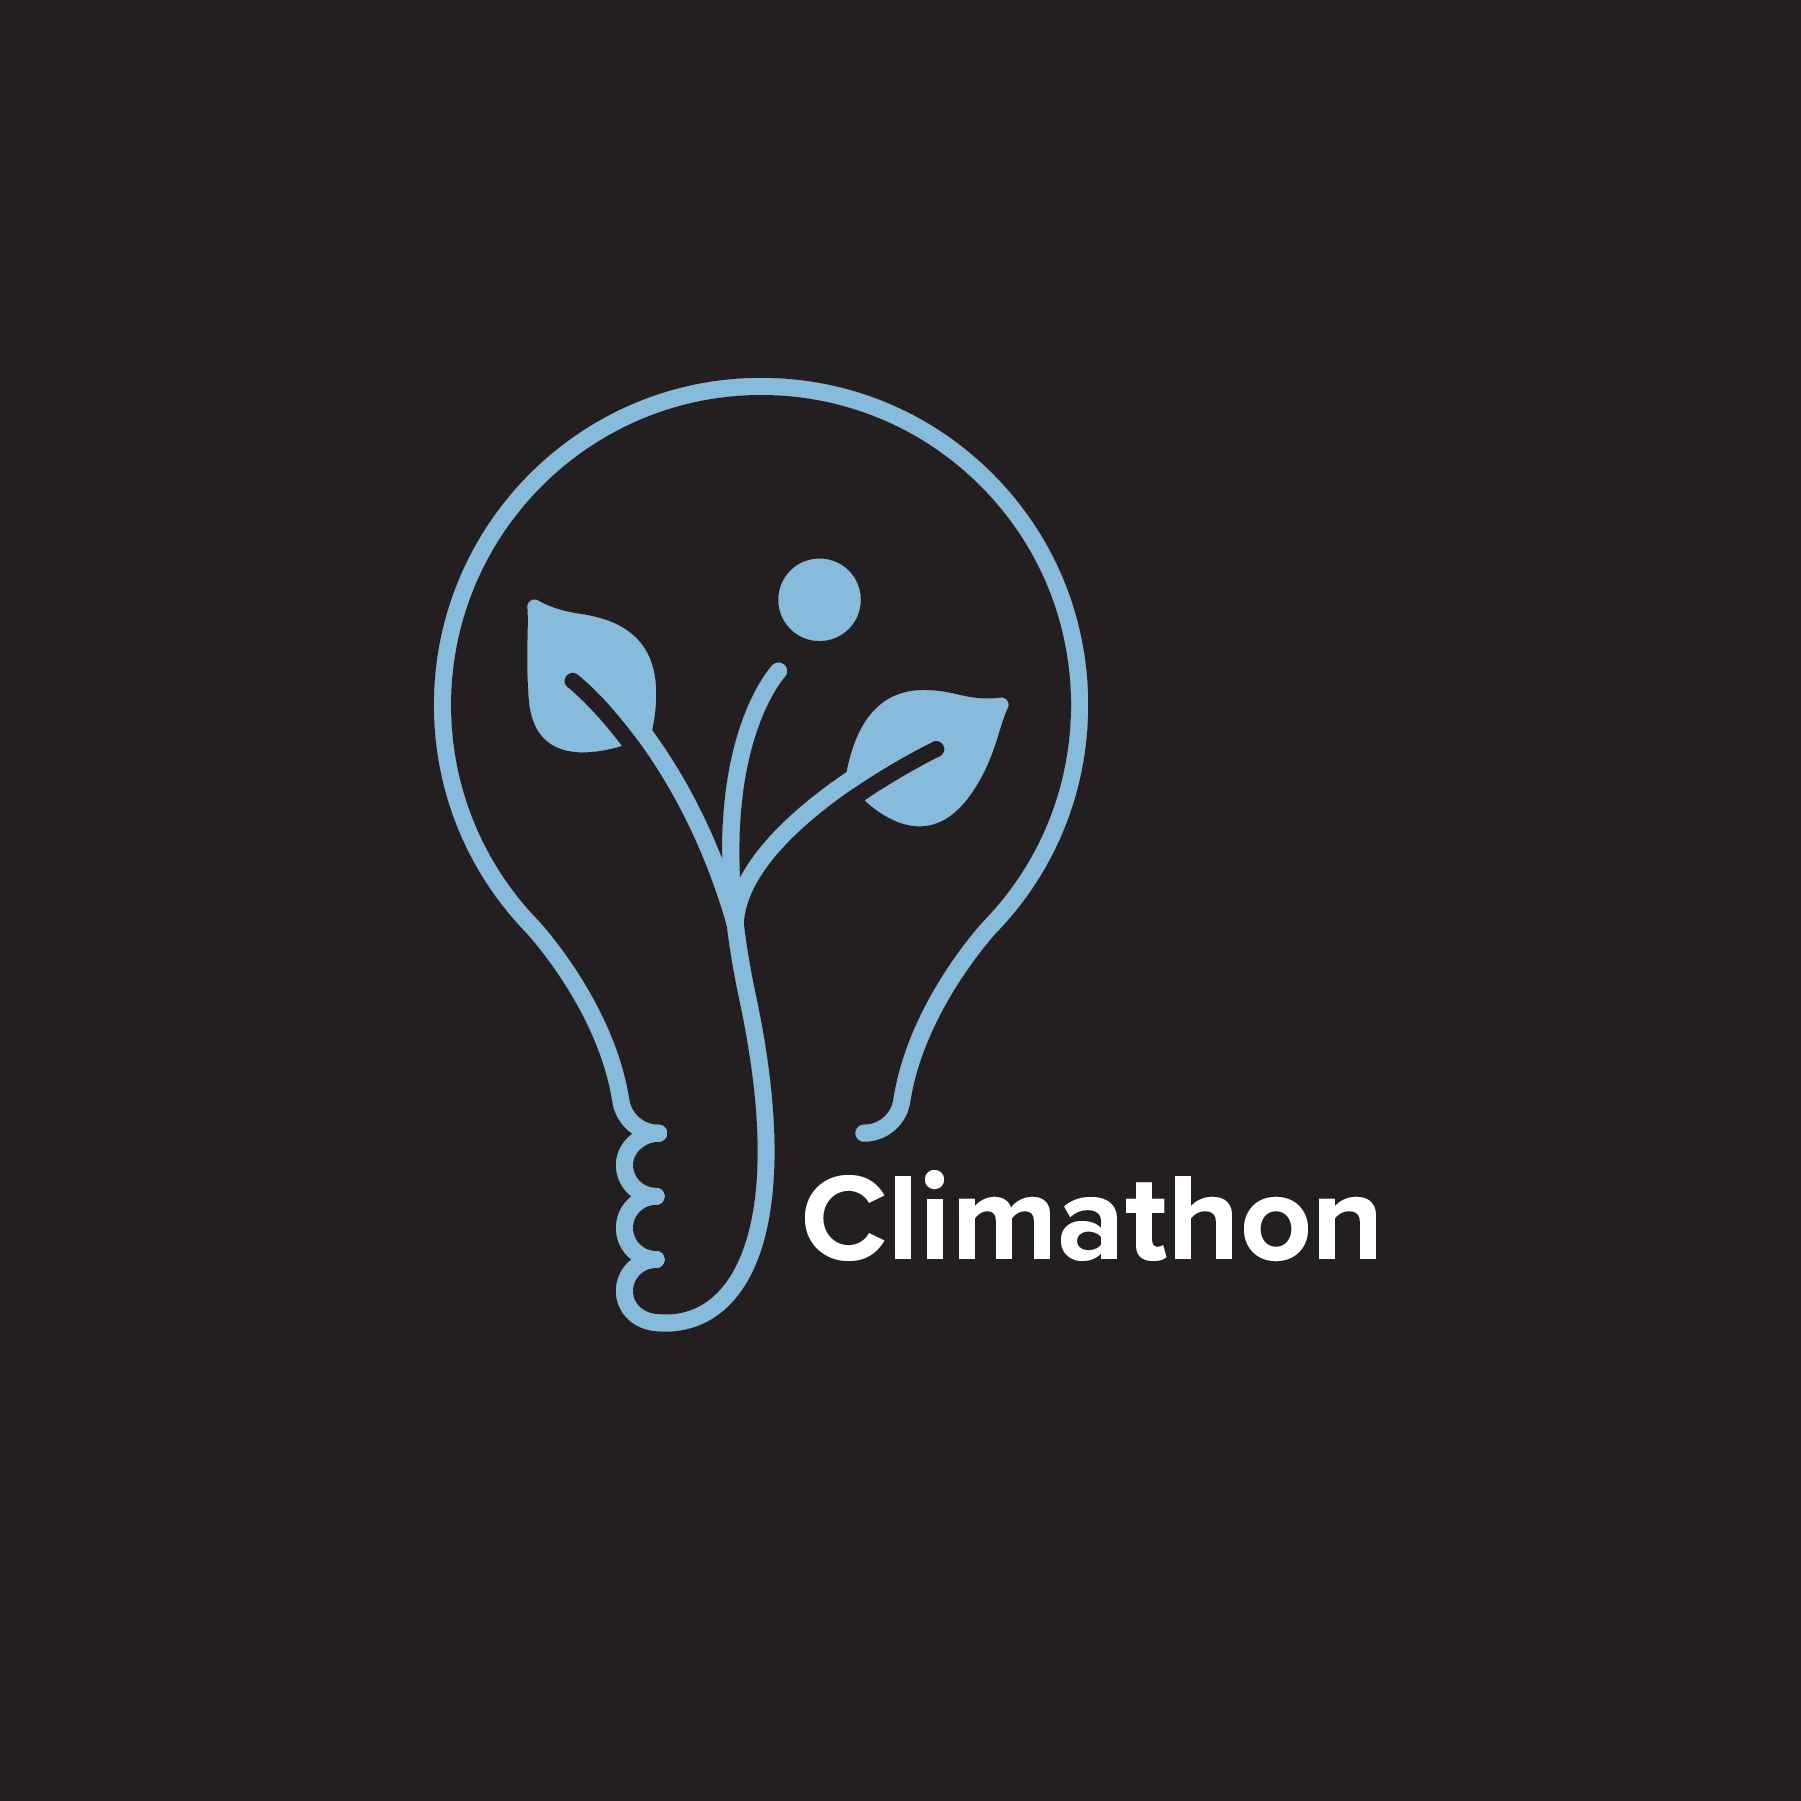 Blue drawing of a lightbulb with leaf inside. The corner of the logo reads "Climathon" (updated)